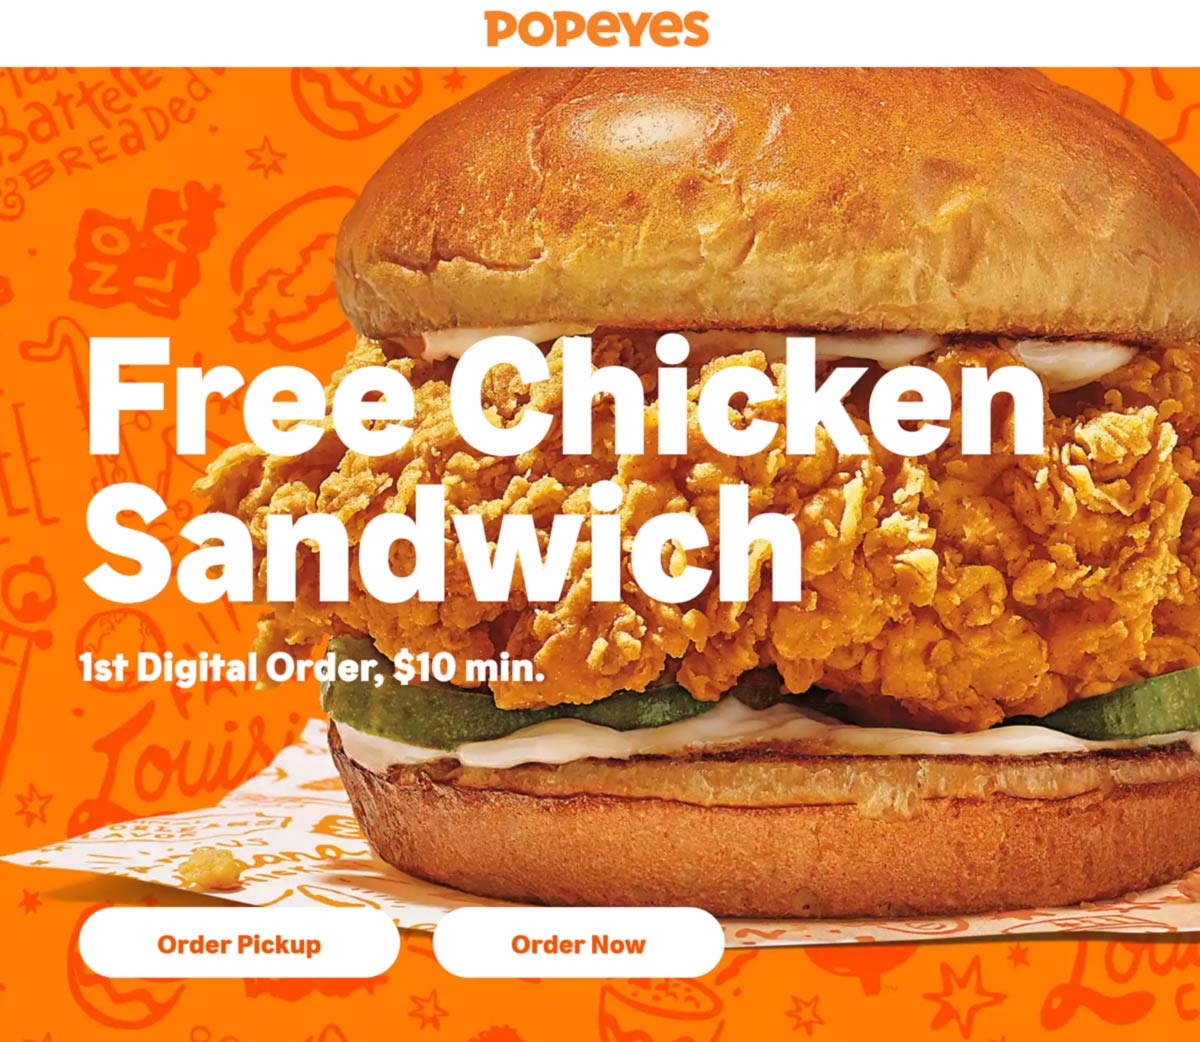 Popeyes restaurants Coupon  Free chicken sandwich with first $10 digitally spent at Popeyes #popeyes 